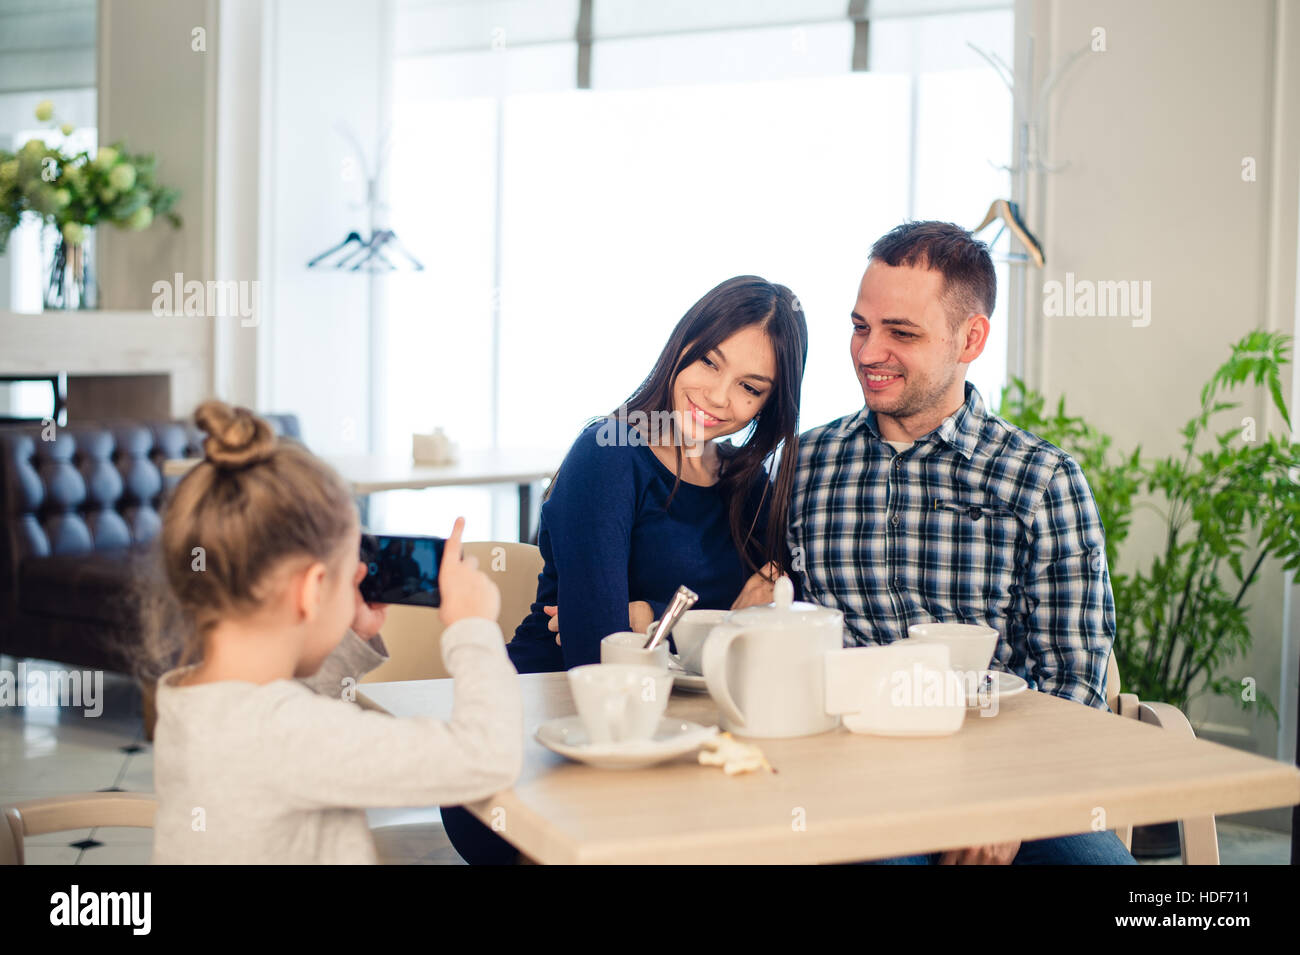 family, parenthood, technology people concept - close up of happy mother, father and little girl having dinner, kid taking photo by smartphone at restaurant Stock Photo